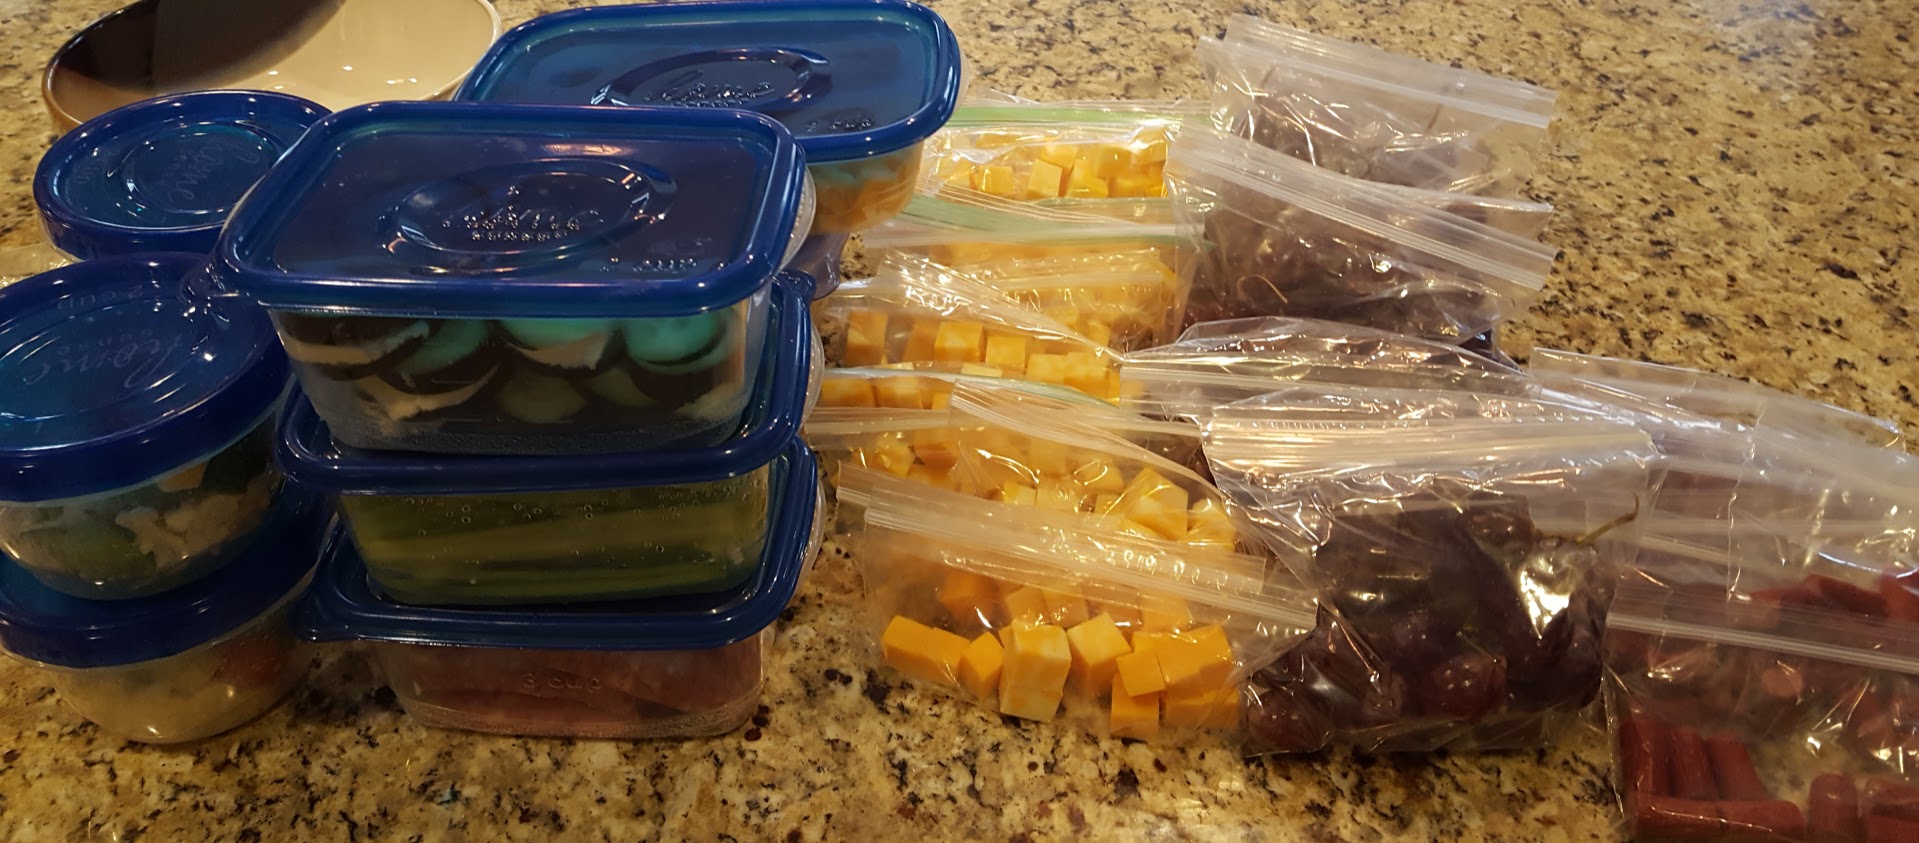 Meal Prepping for Keto